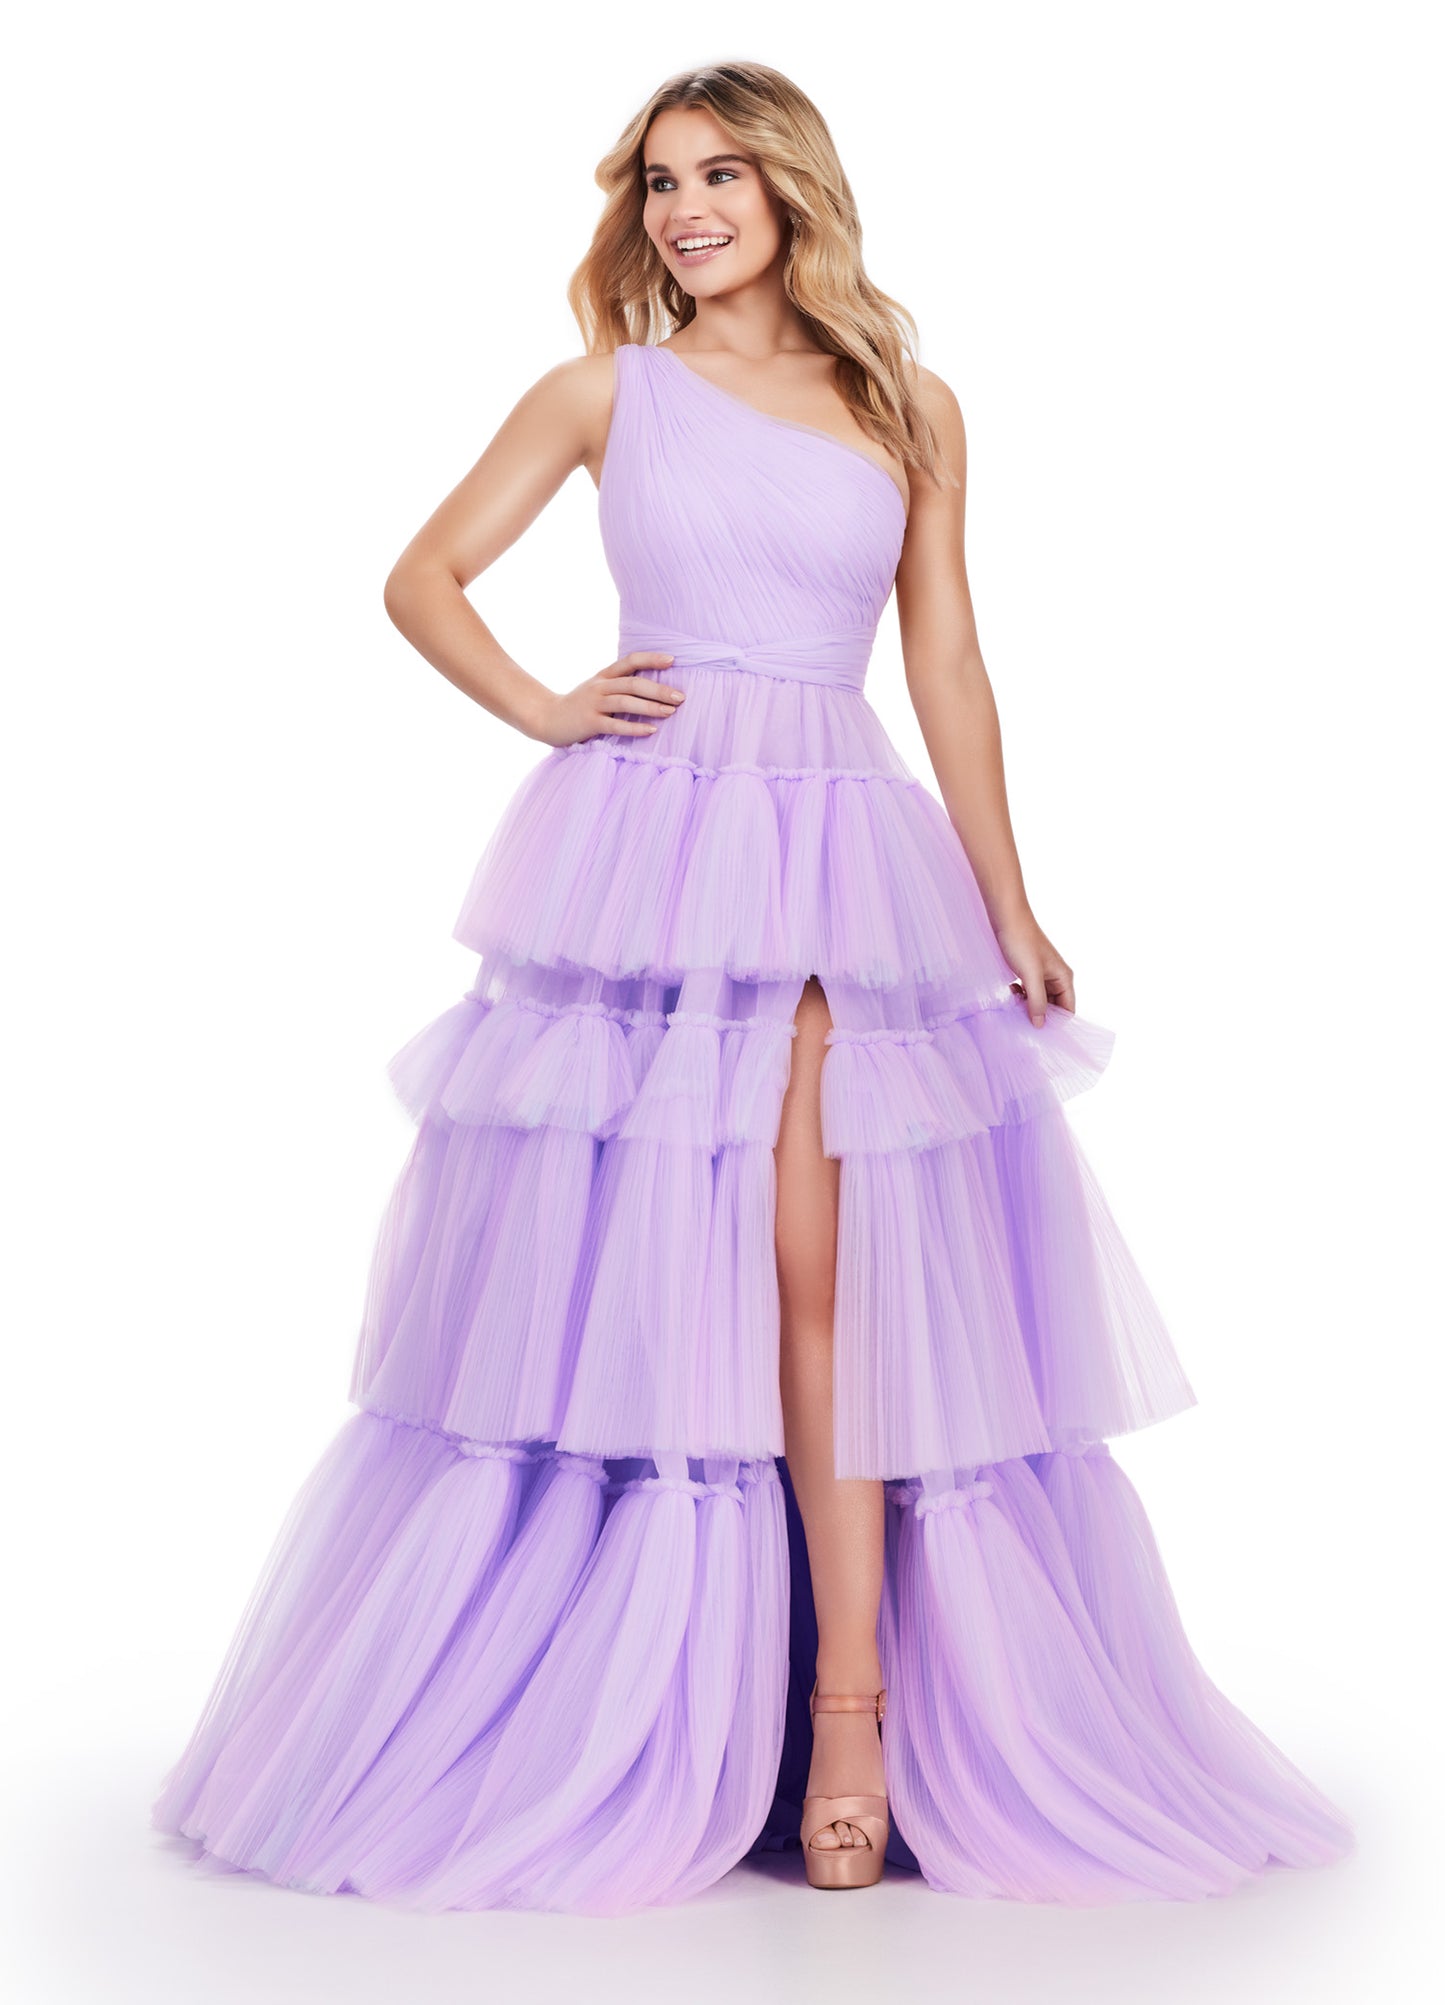 Turn heads at prom or pageants with the Ashley Lauren 11619 Long Prom Dress. This stunning two-tone tiered tulle ball gown features a sleek left leg slit, adding a touch of elegance to your look. Expertly crafted with top-quality materials, this dress is perfect for making a statement and feeling confident. Tiered dreams! This two-tone tired tulle ball gown features a one shoulder design and a left leg slit.